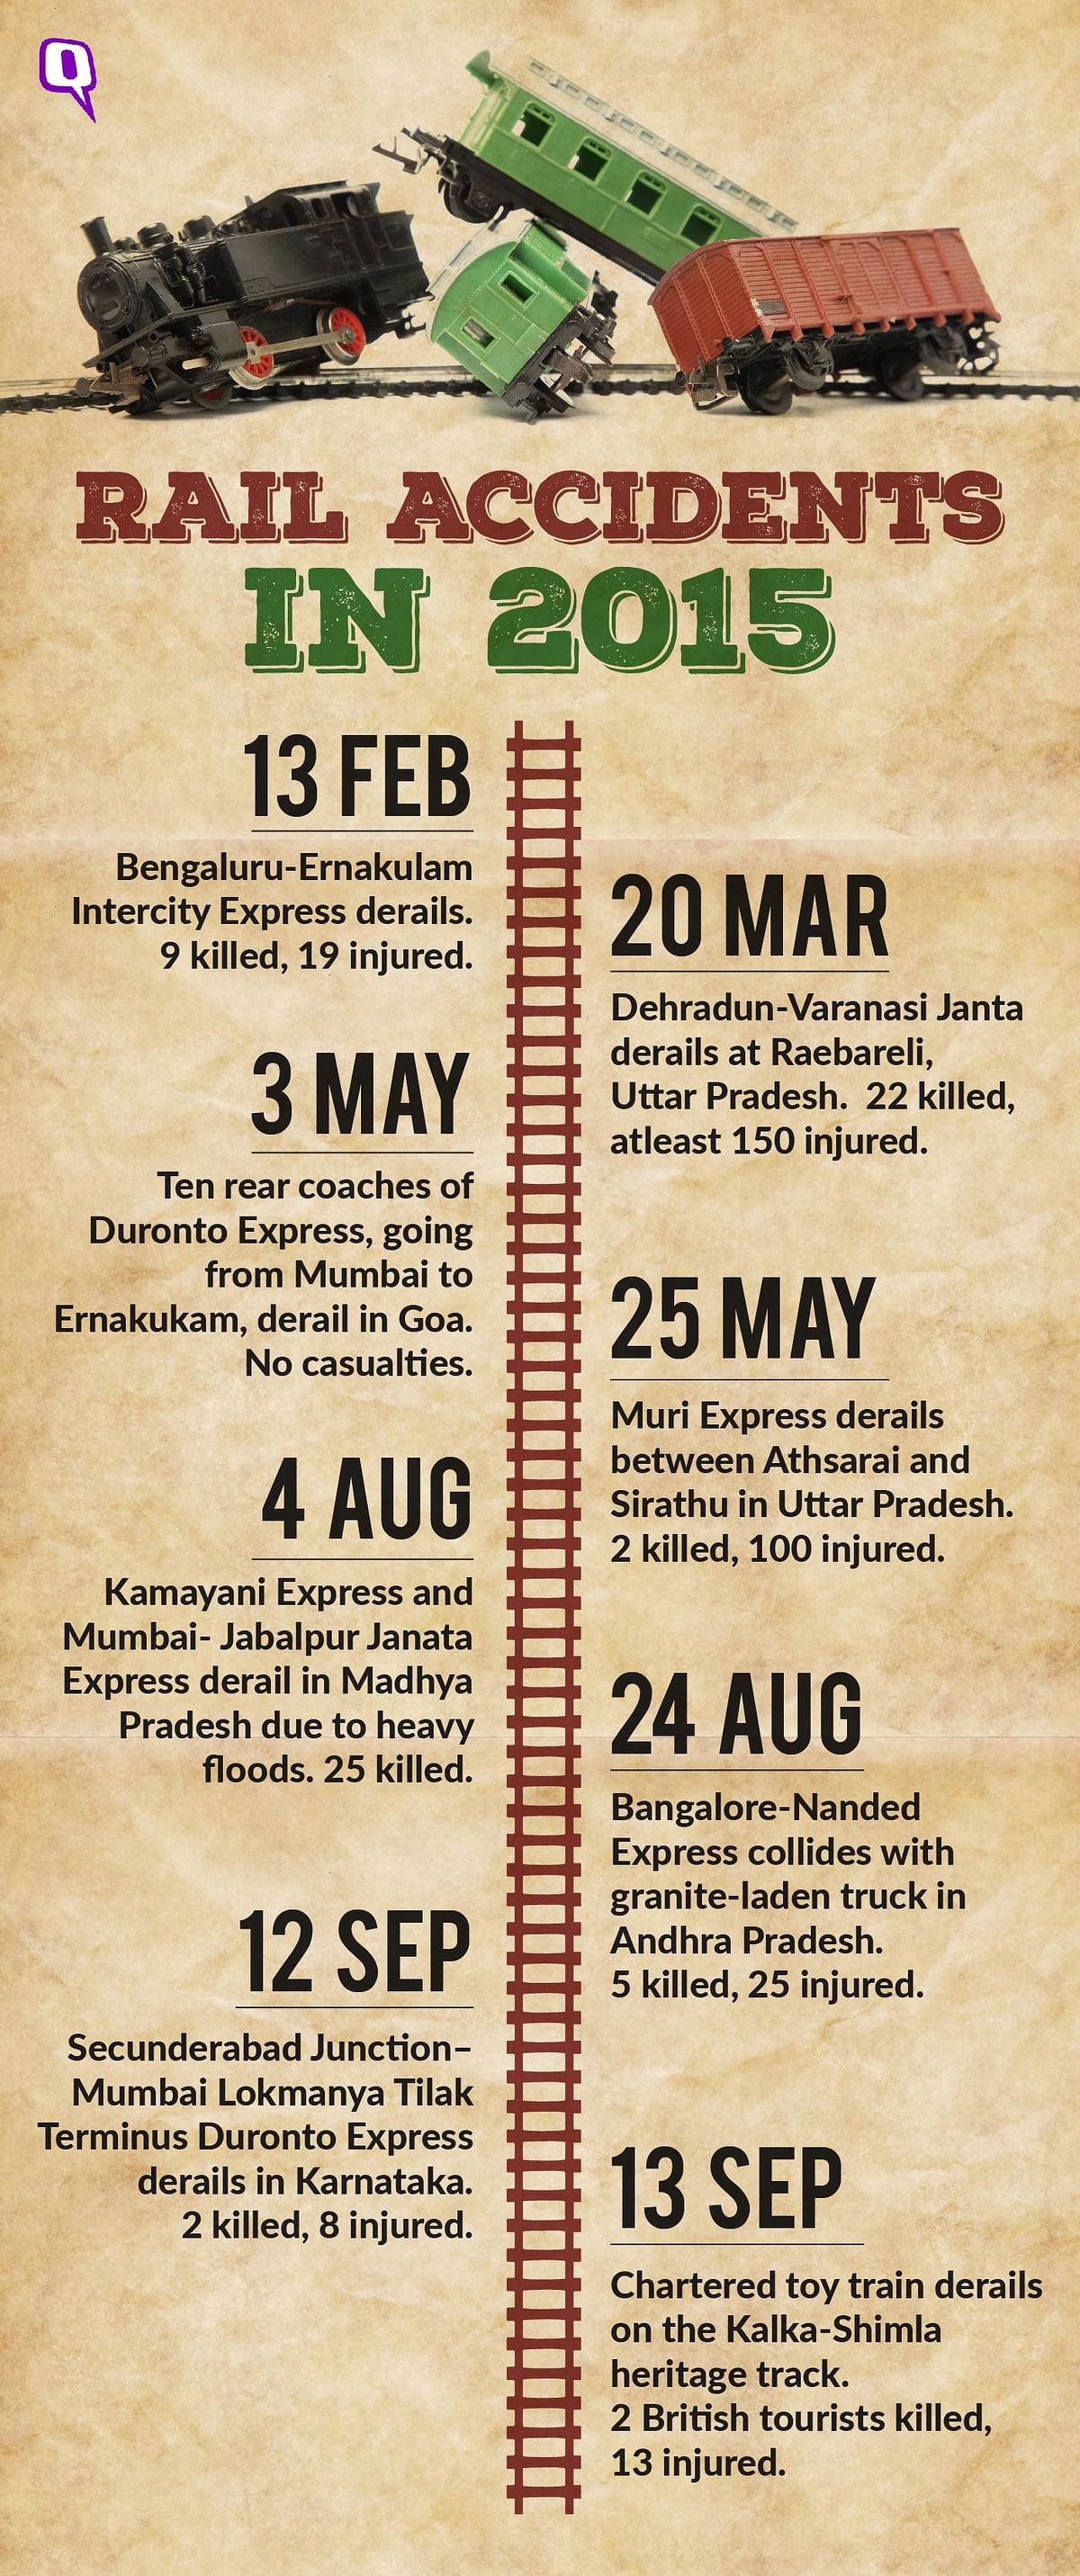 There have been eight major rail accidents in India in 2017 so far.